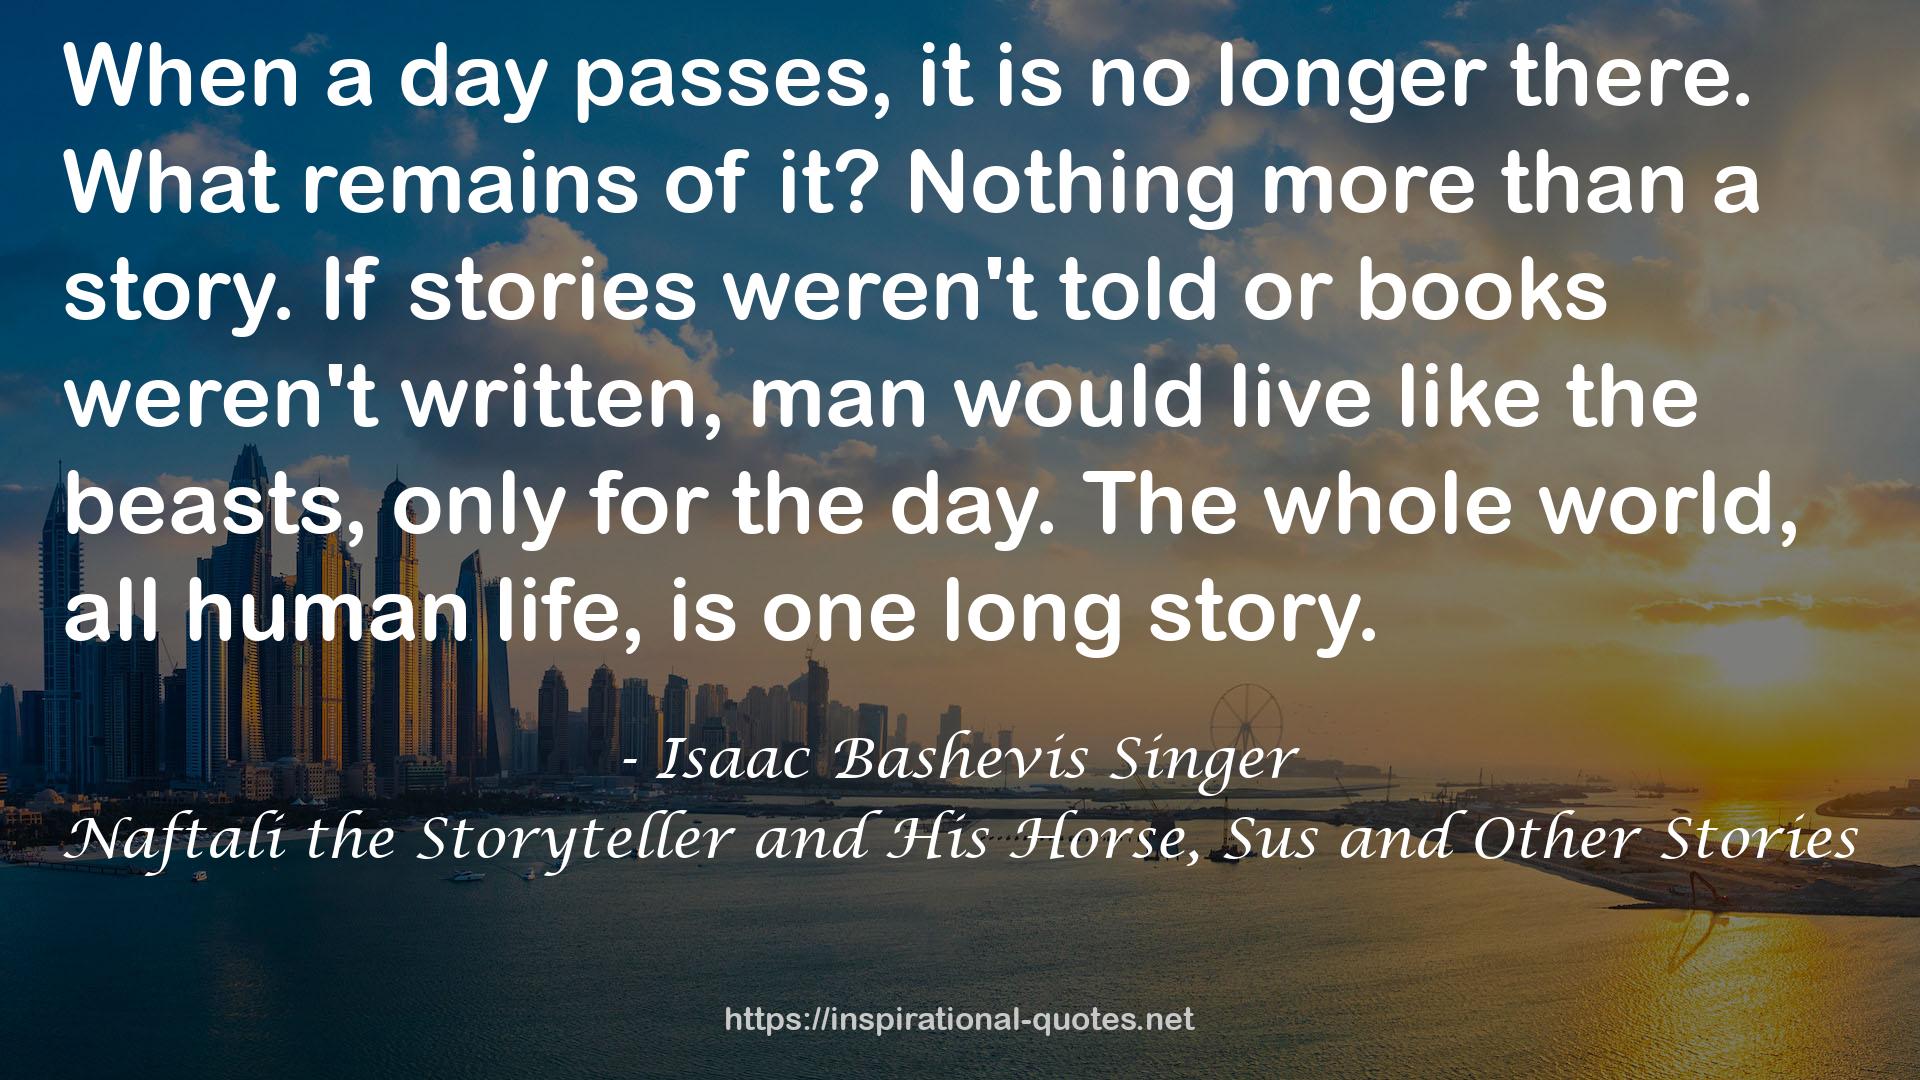 Naftali the Storyteller and His Horse, Sus and Other Stories QUOTES